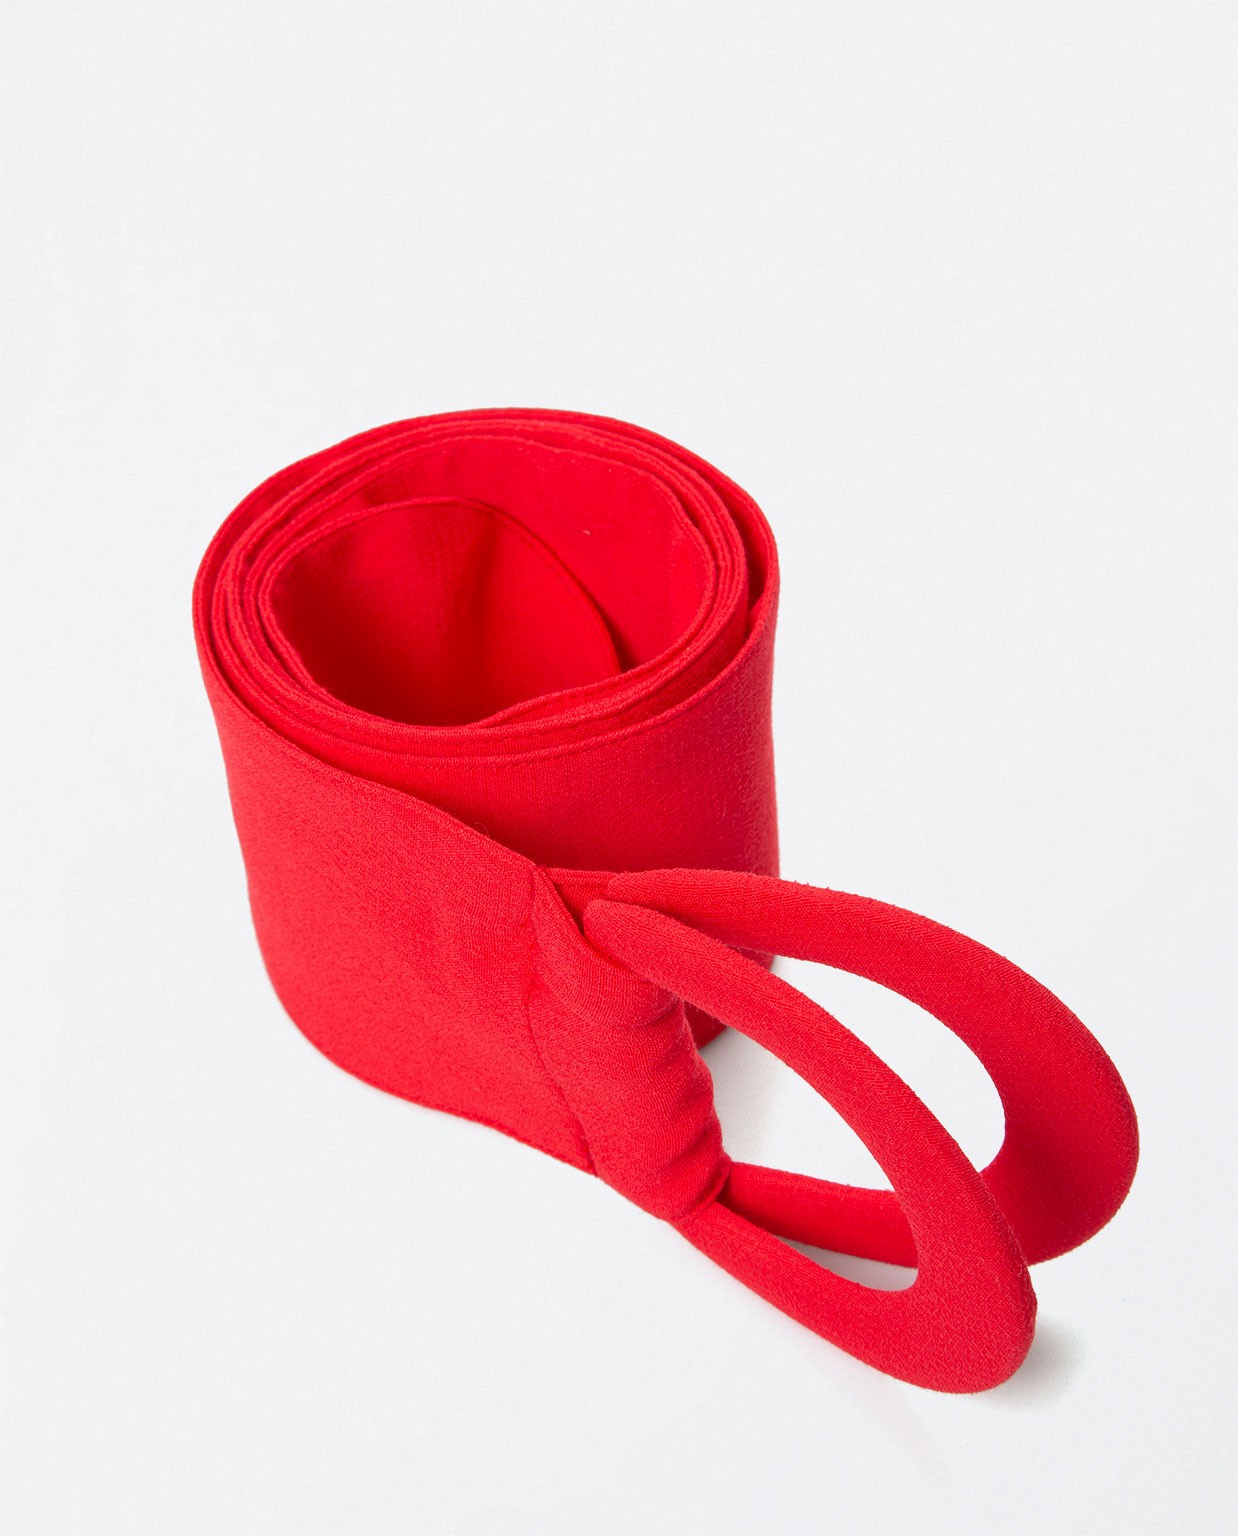 Wide belt in fabric with double buckle. Red